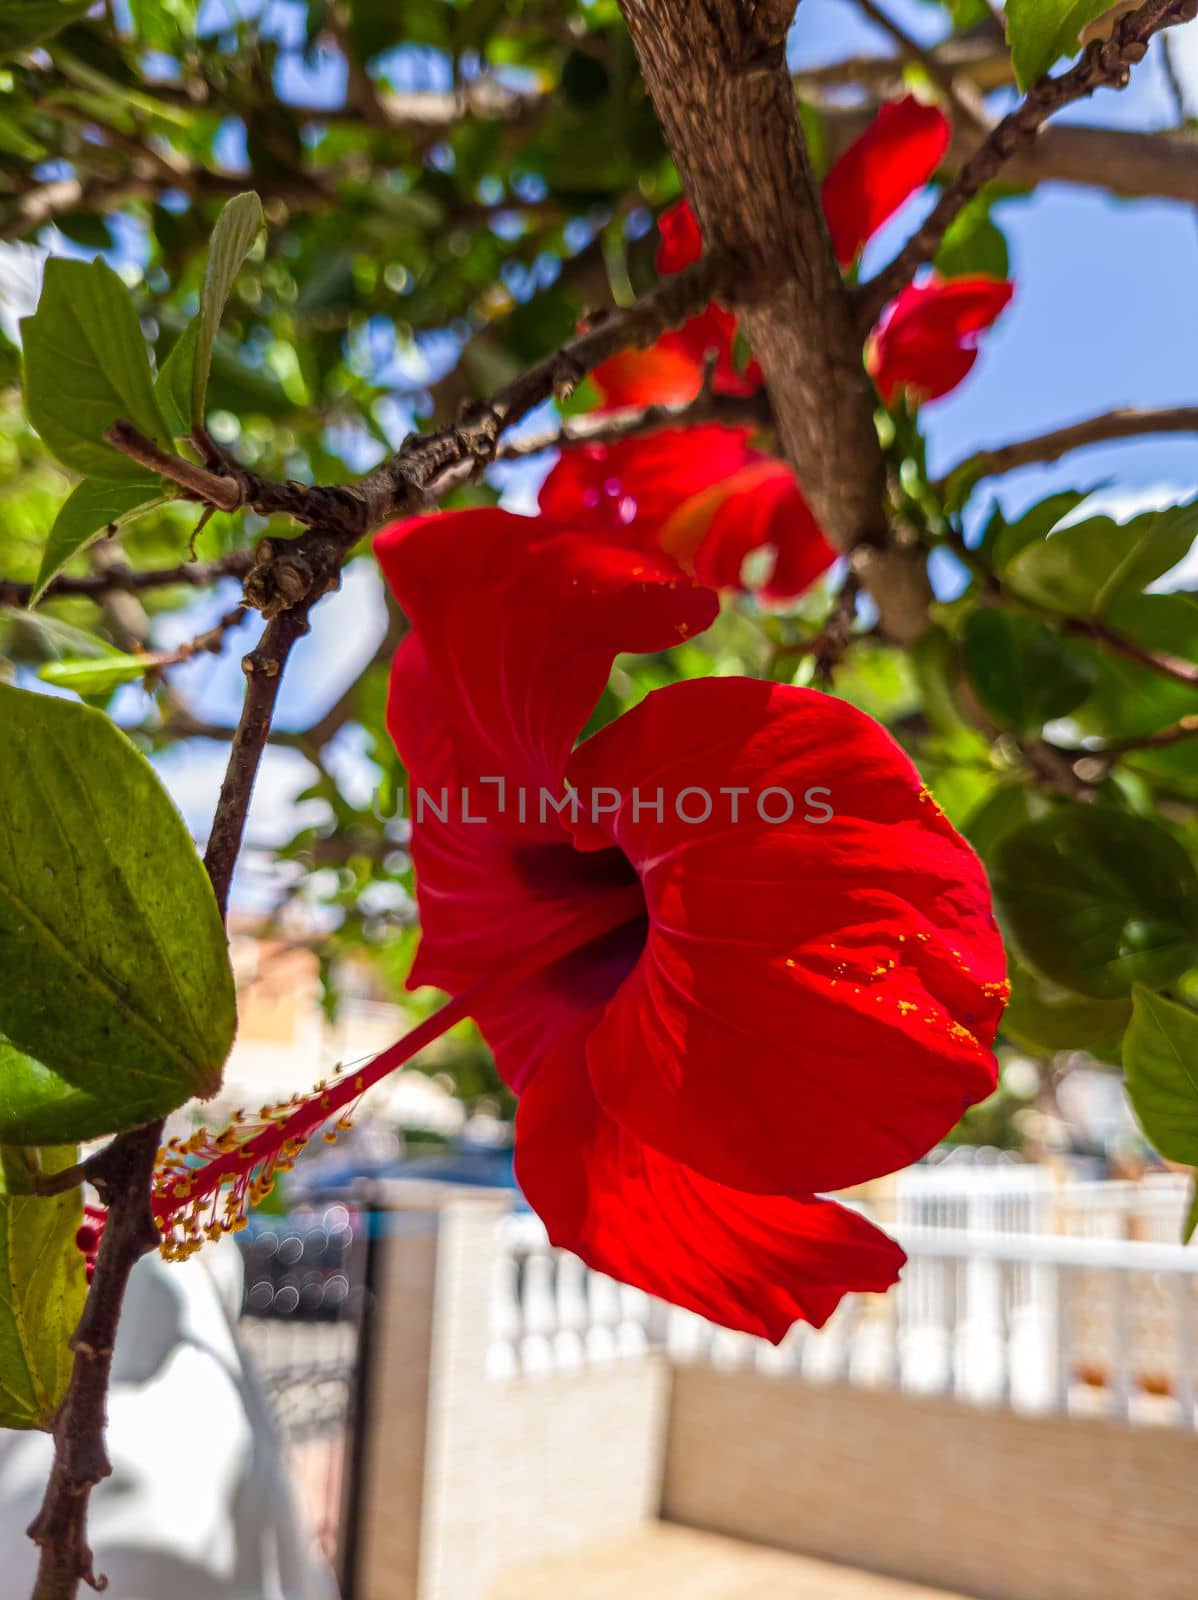 Hibiscus flower is a shrub of the Malvaceae tribe originating from East Asia and is widely grown as an ornamental plant in tropical and subtropical regions. Large flowers, red and odorless by Milanchikov